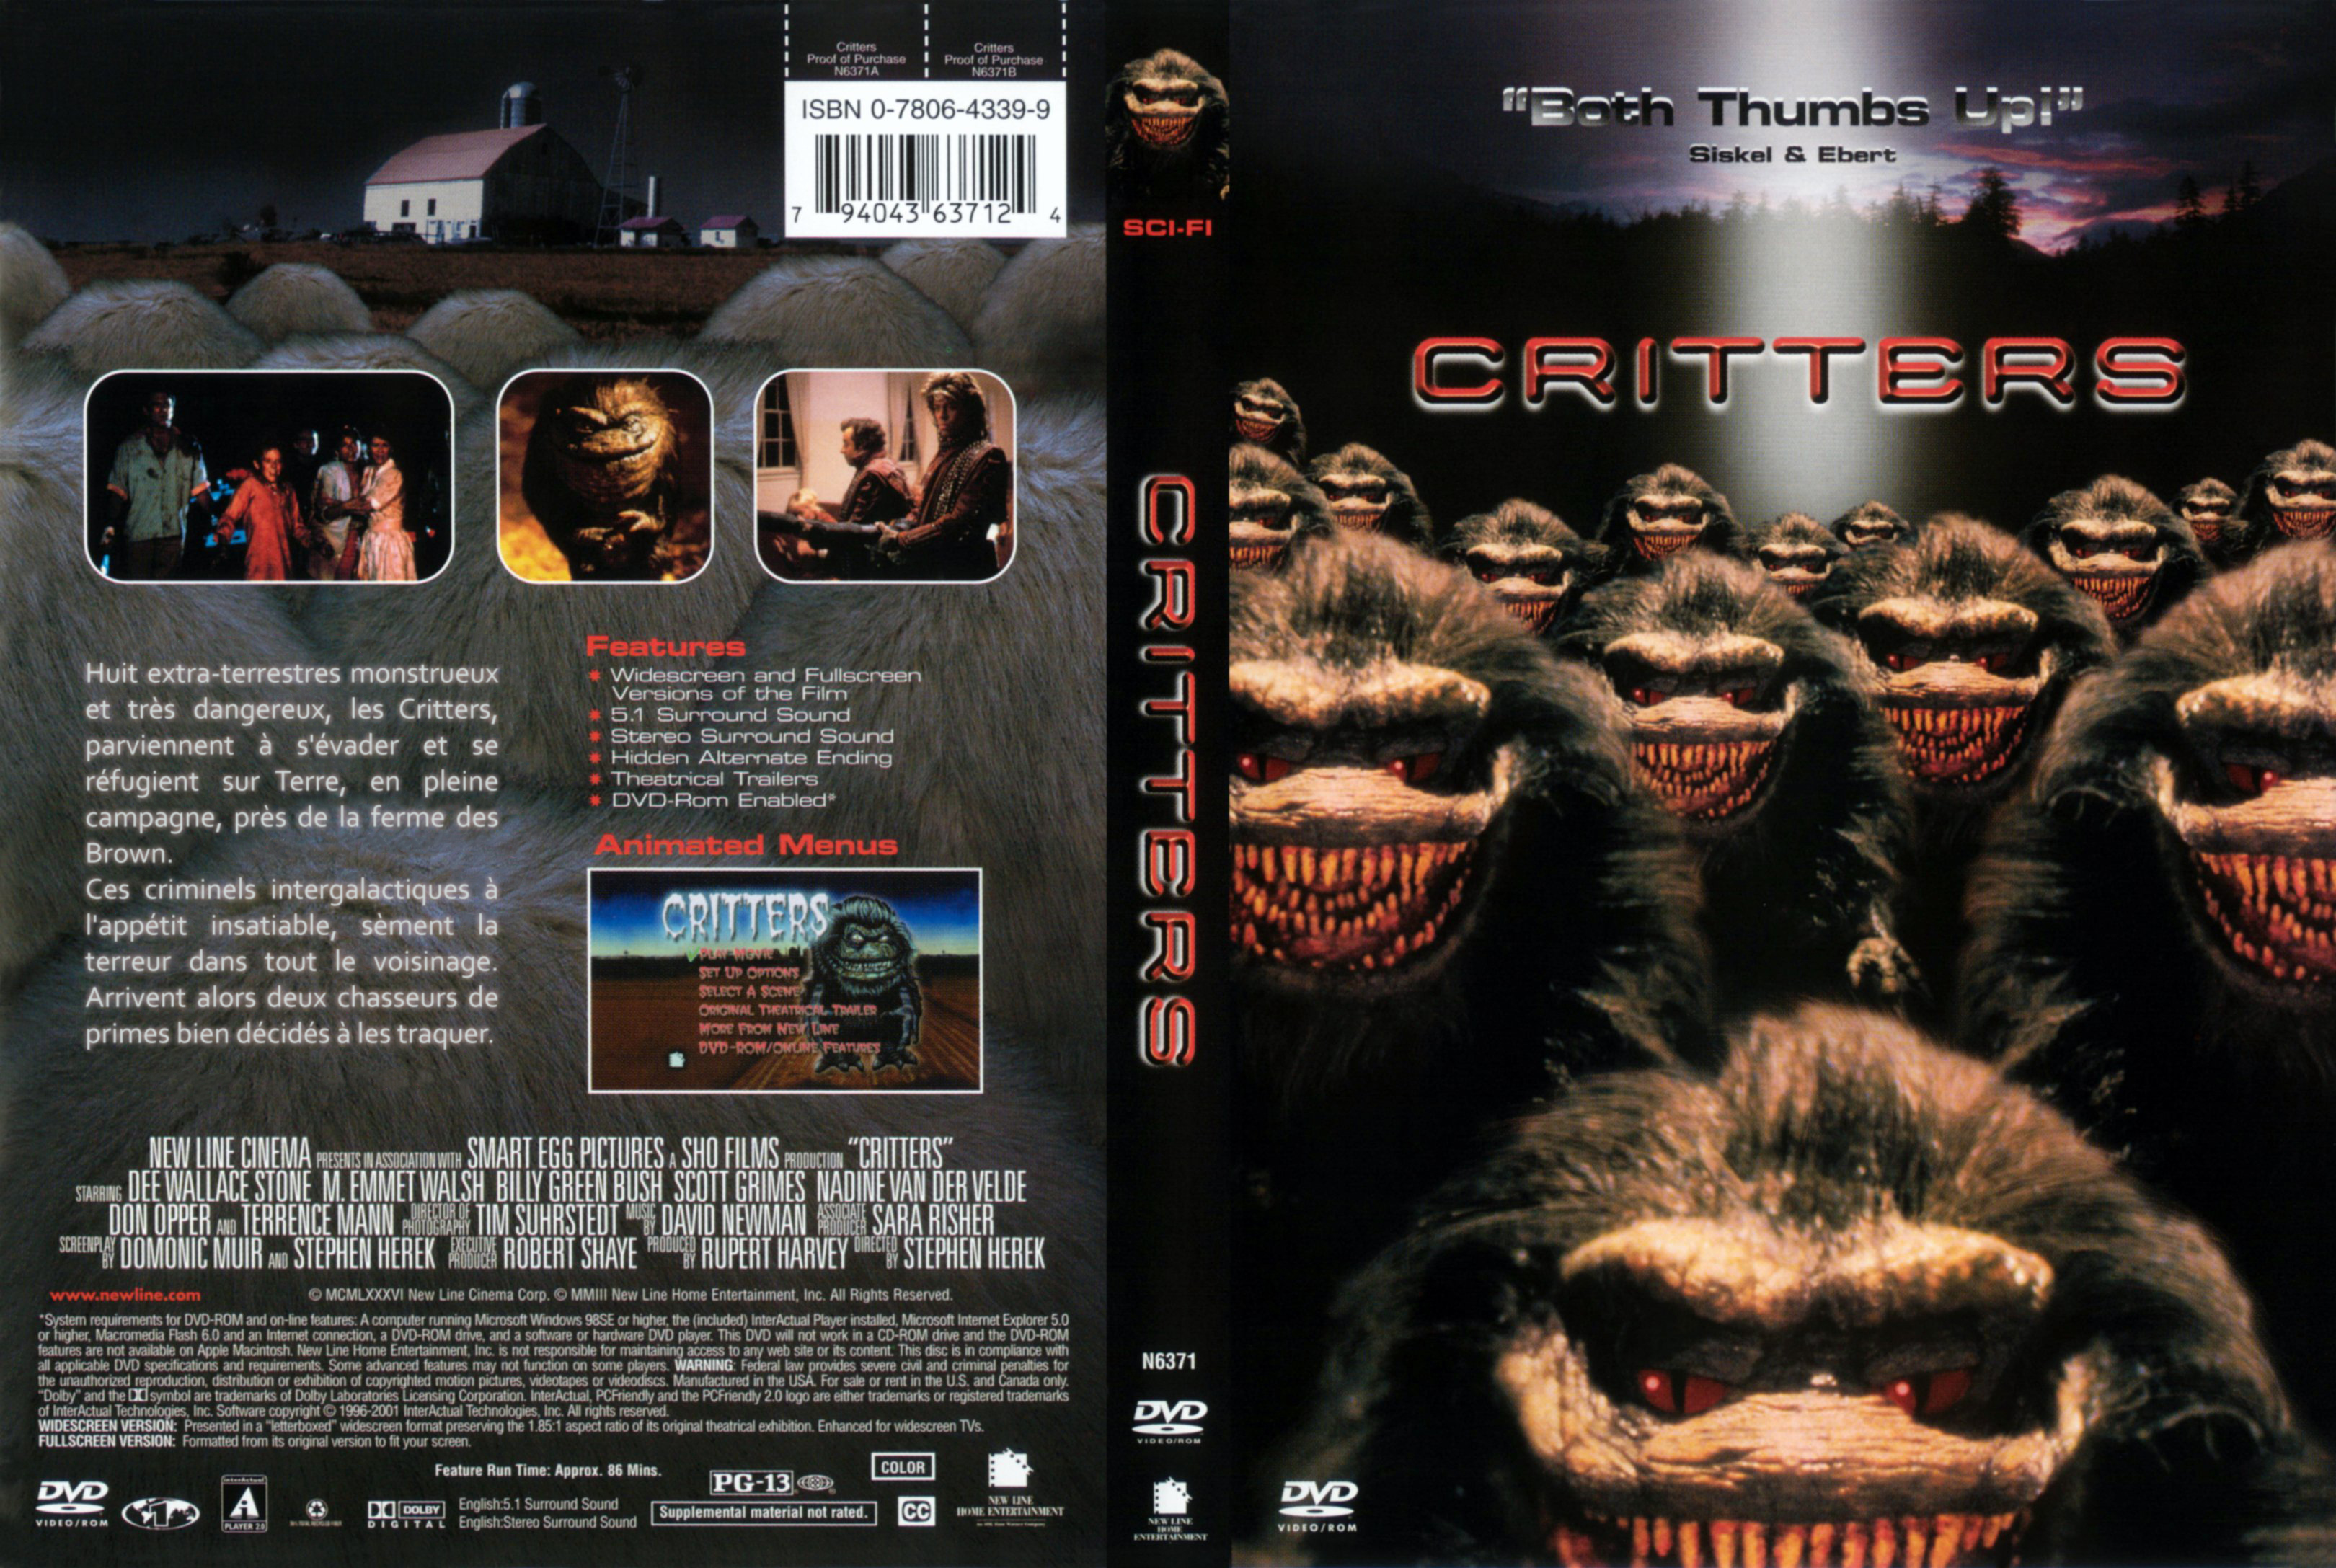 Jaquette DVD Critters (Canadienne)